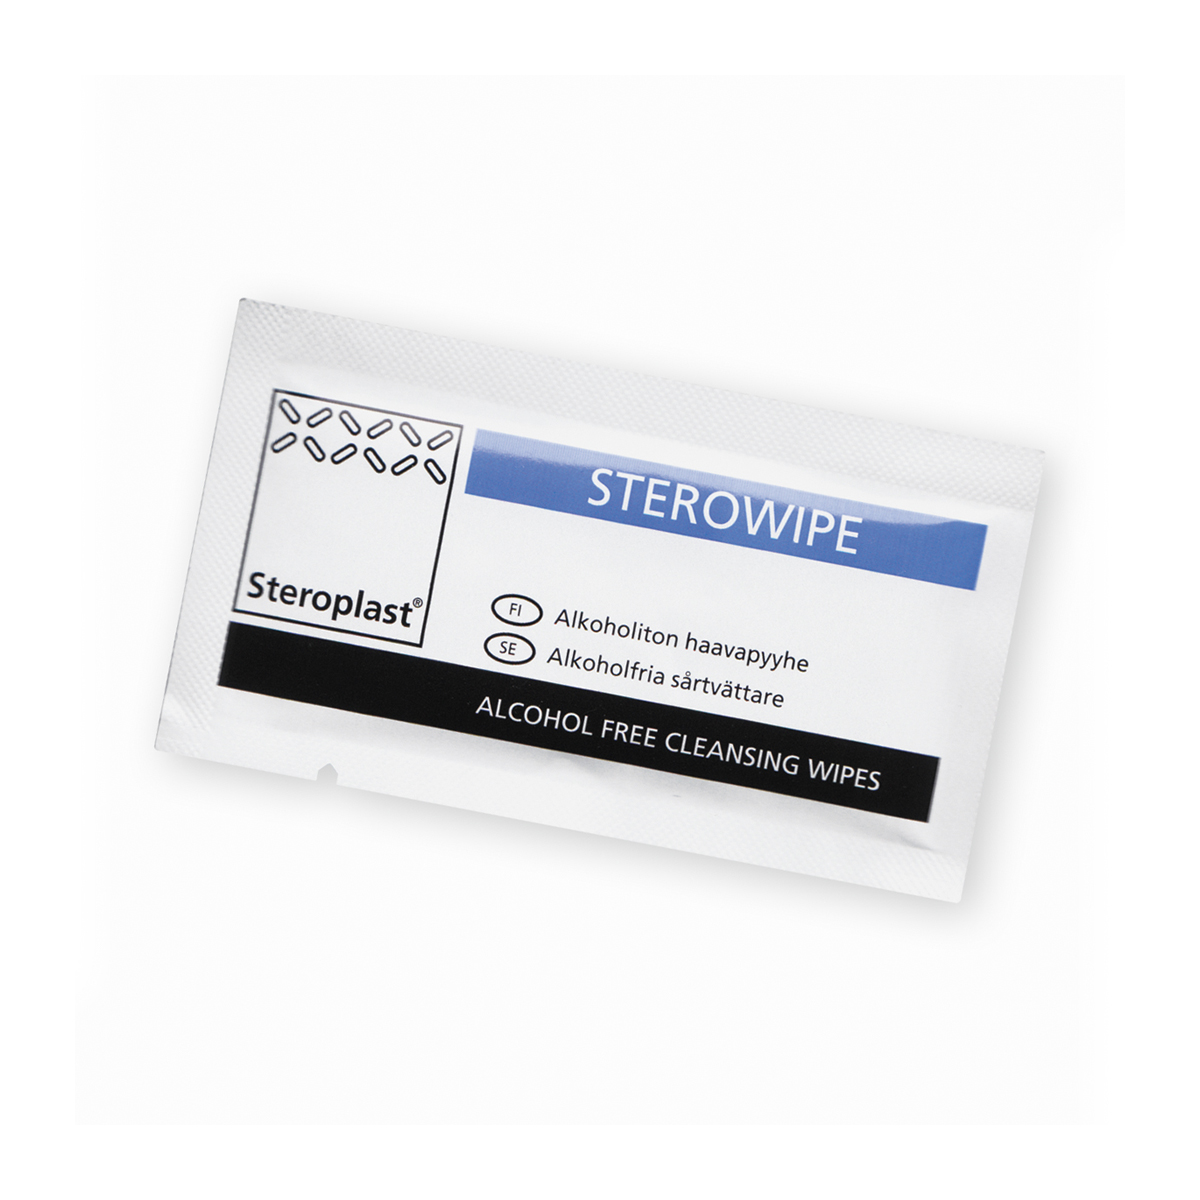 Sterowipe Alcohol Free Cleansing Wipes